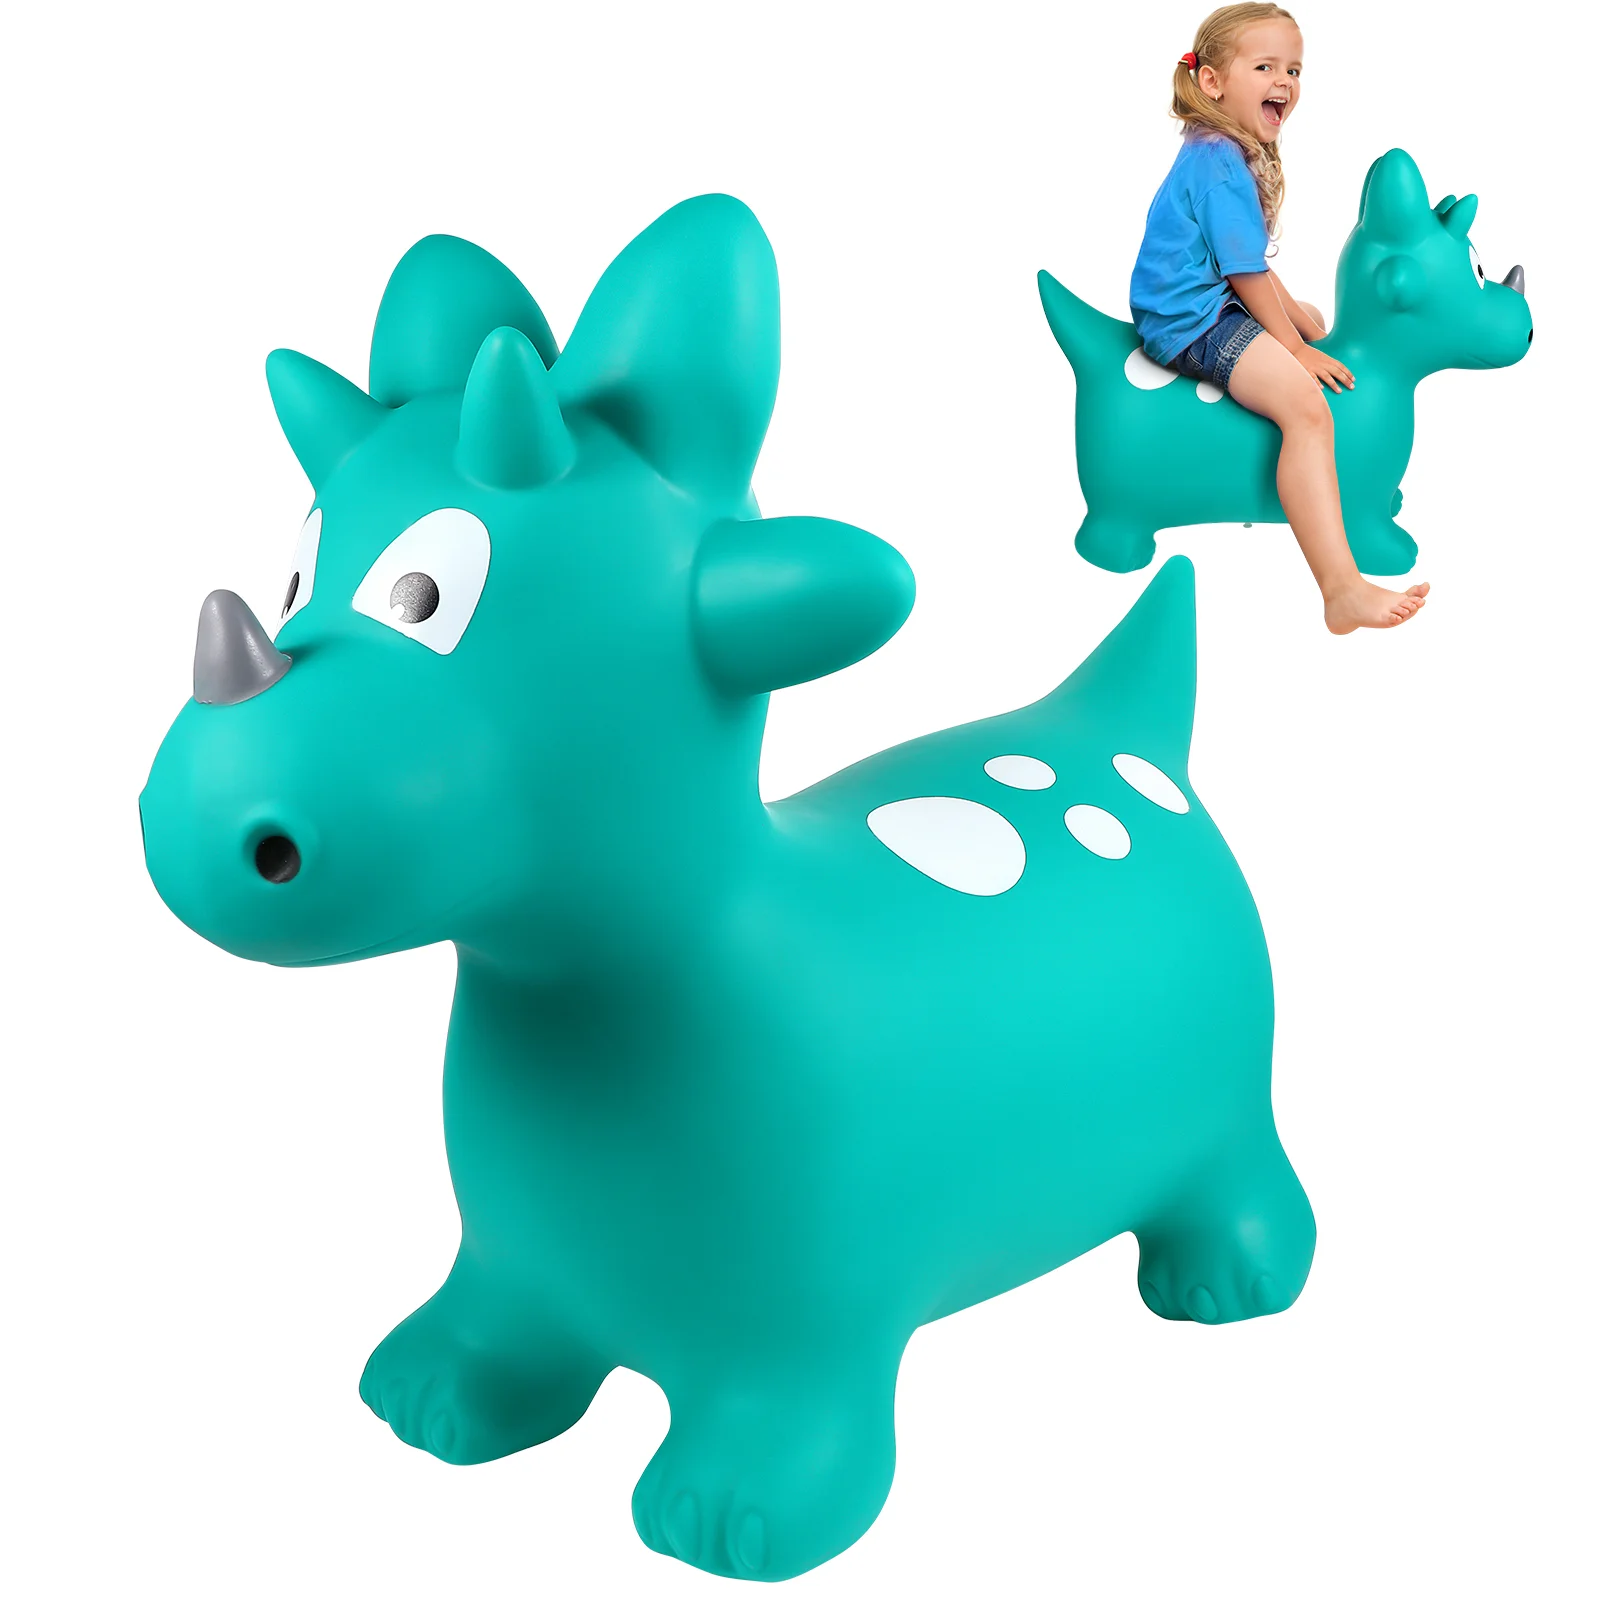 

Bouncing Ball Bouncy Horse Hopper Inflatable Toy Bounce Dinosaur Pvc Jumping Kids